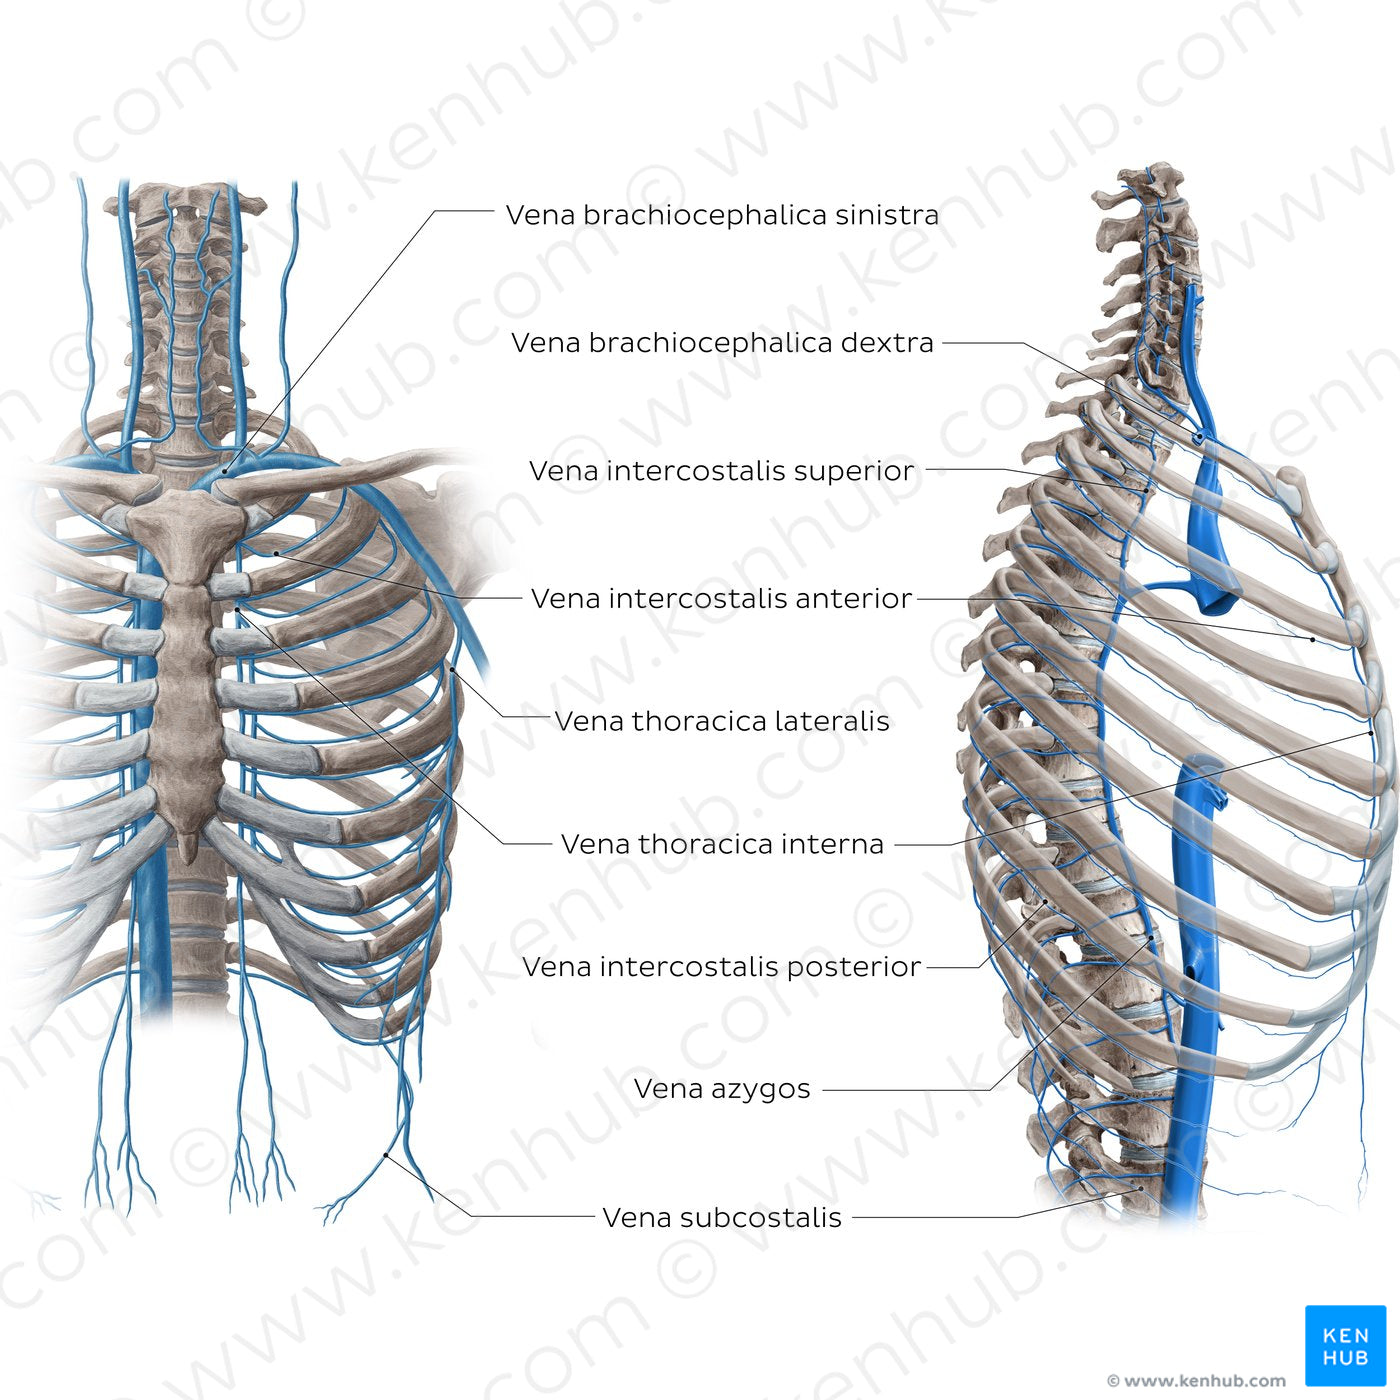 Veins of the thoracic wall (Latin)